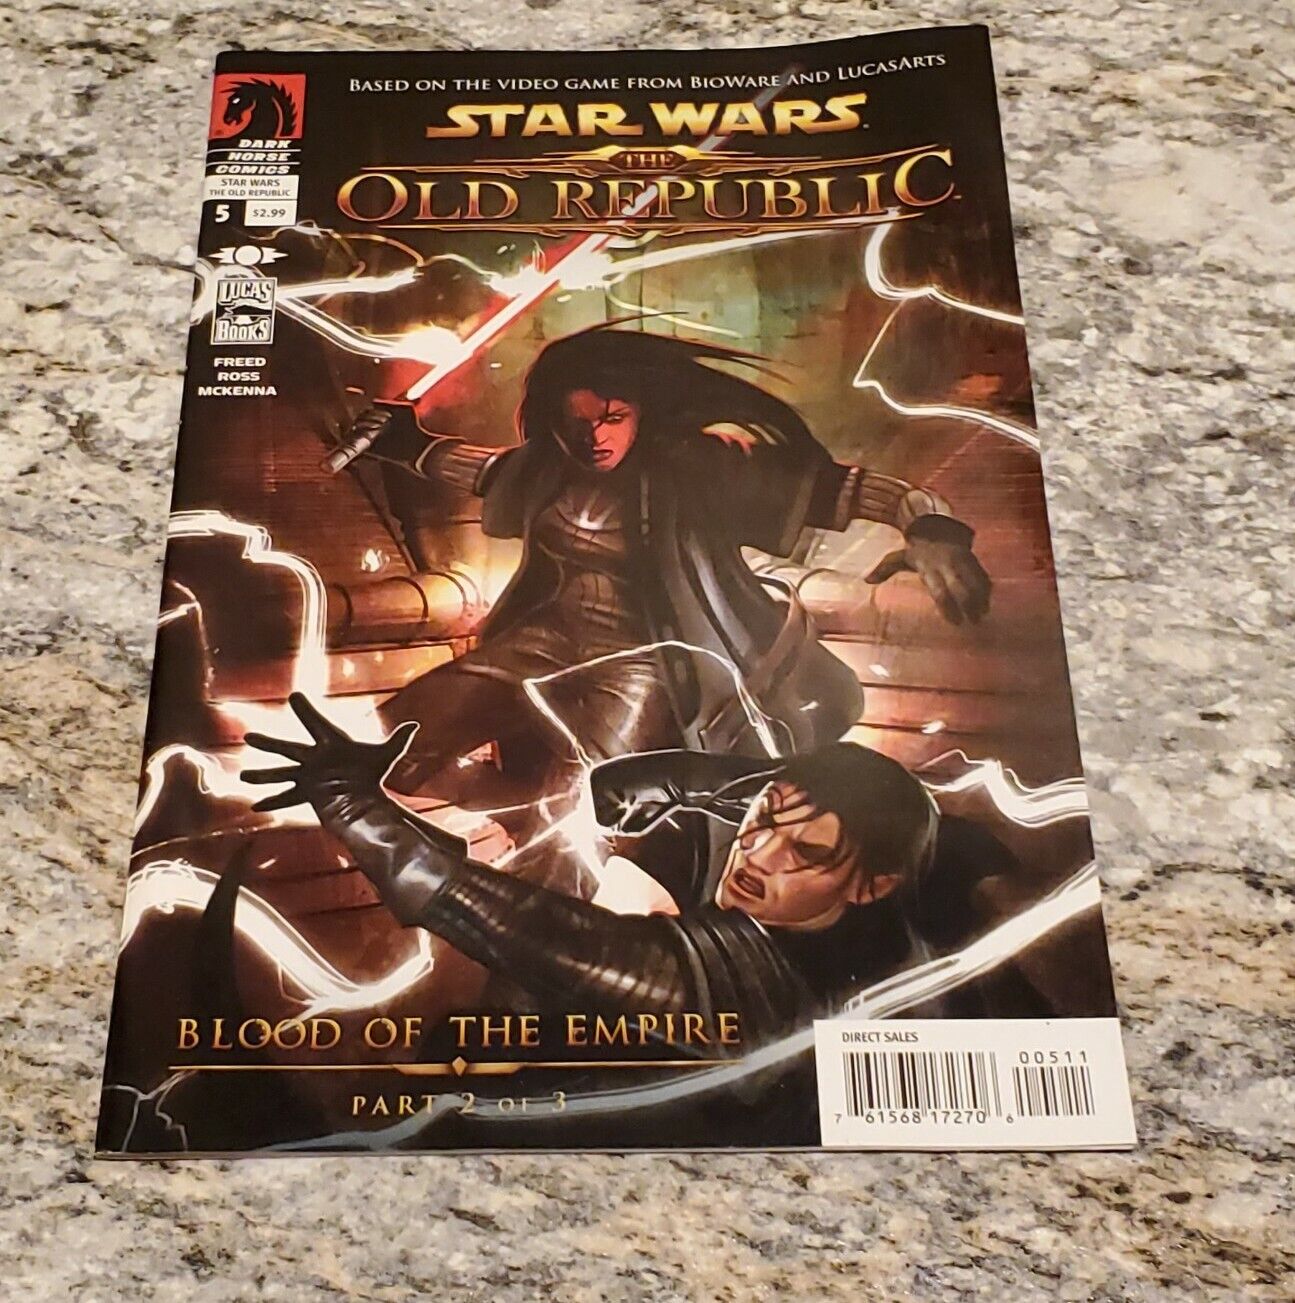 Star Wars The Old Republic Blood of the Empire Comic Part 2 Dark Horse 2010